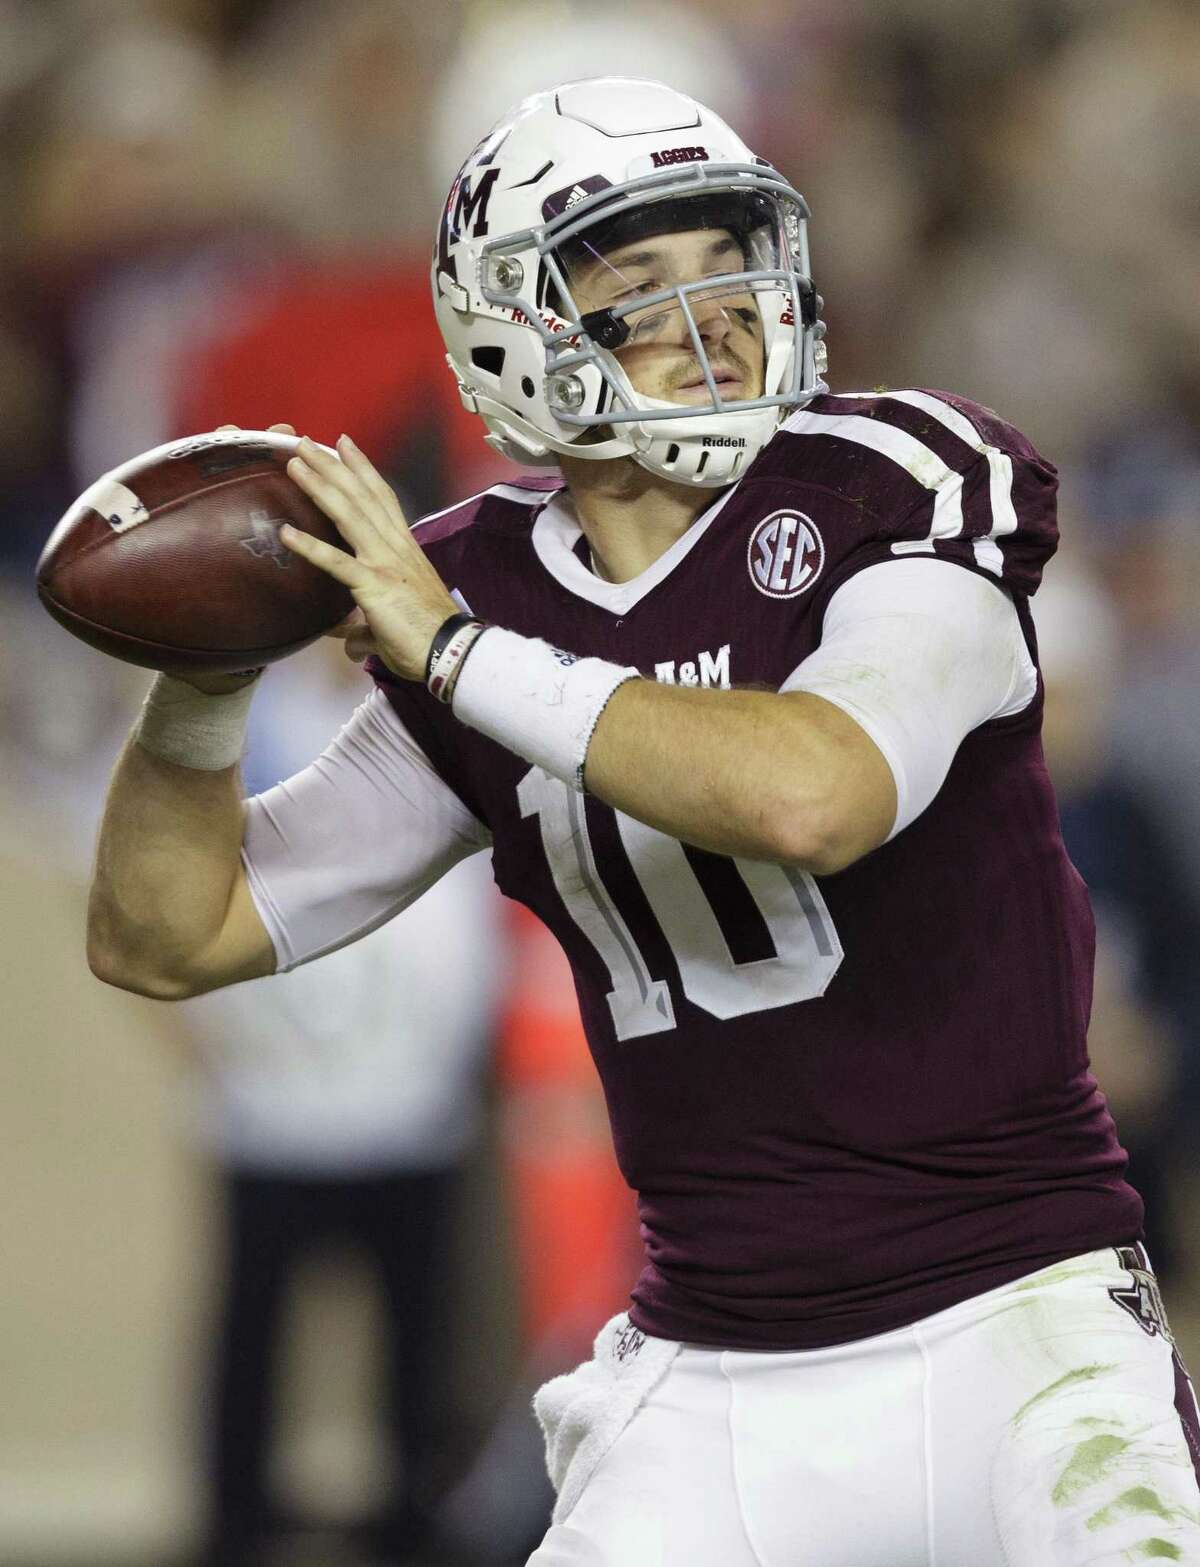 Texas A&M quarterback Jake Hubenak (10) looks to pass downfield against Mississippi during the fourth quarter of an NCAA college football game Saturday, Nov. 12, 2016, in College Station, Texas. Ole Miss won 29-28. (AP Photo/Sam Craft)